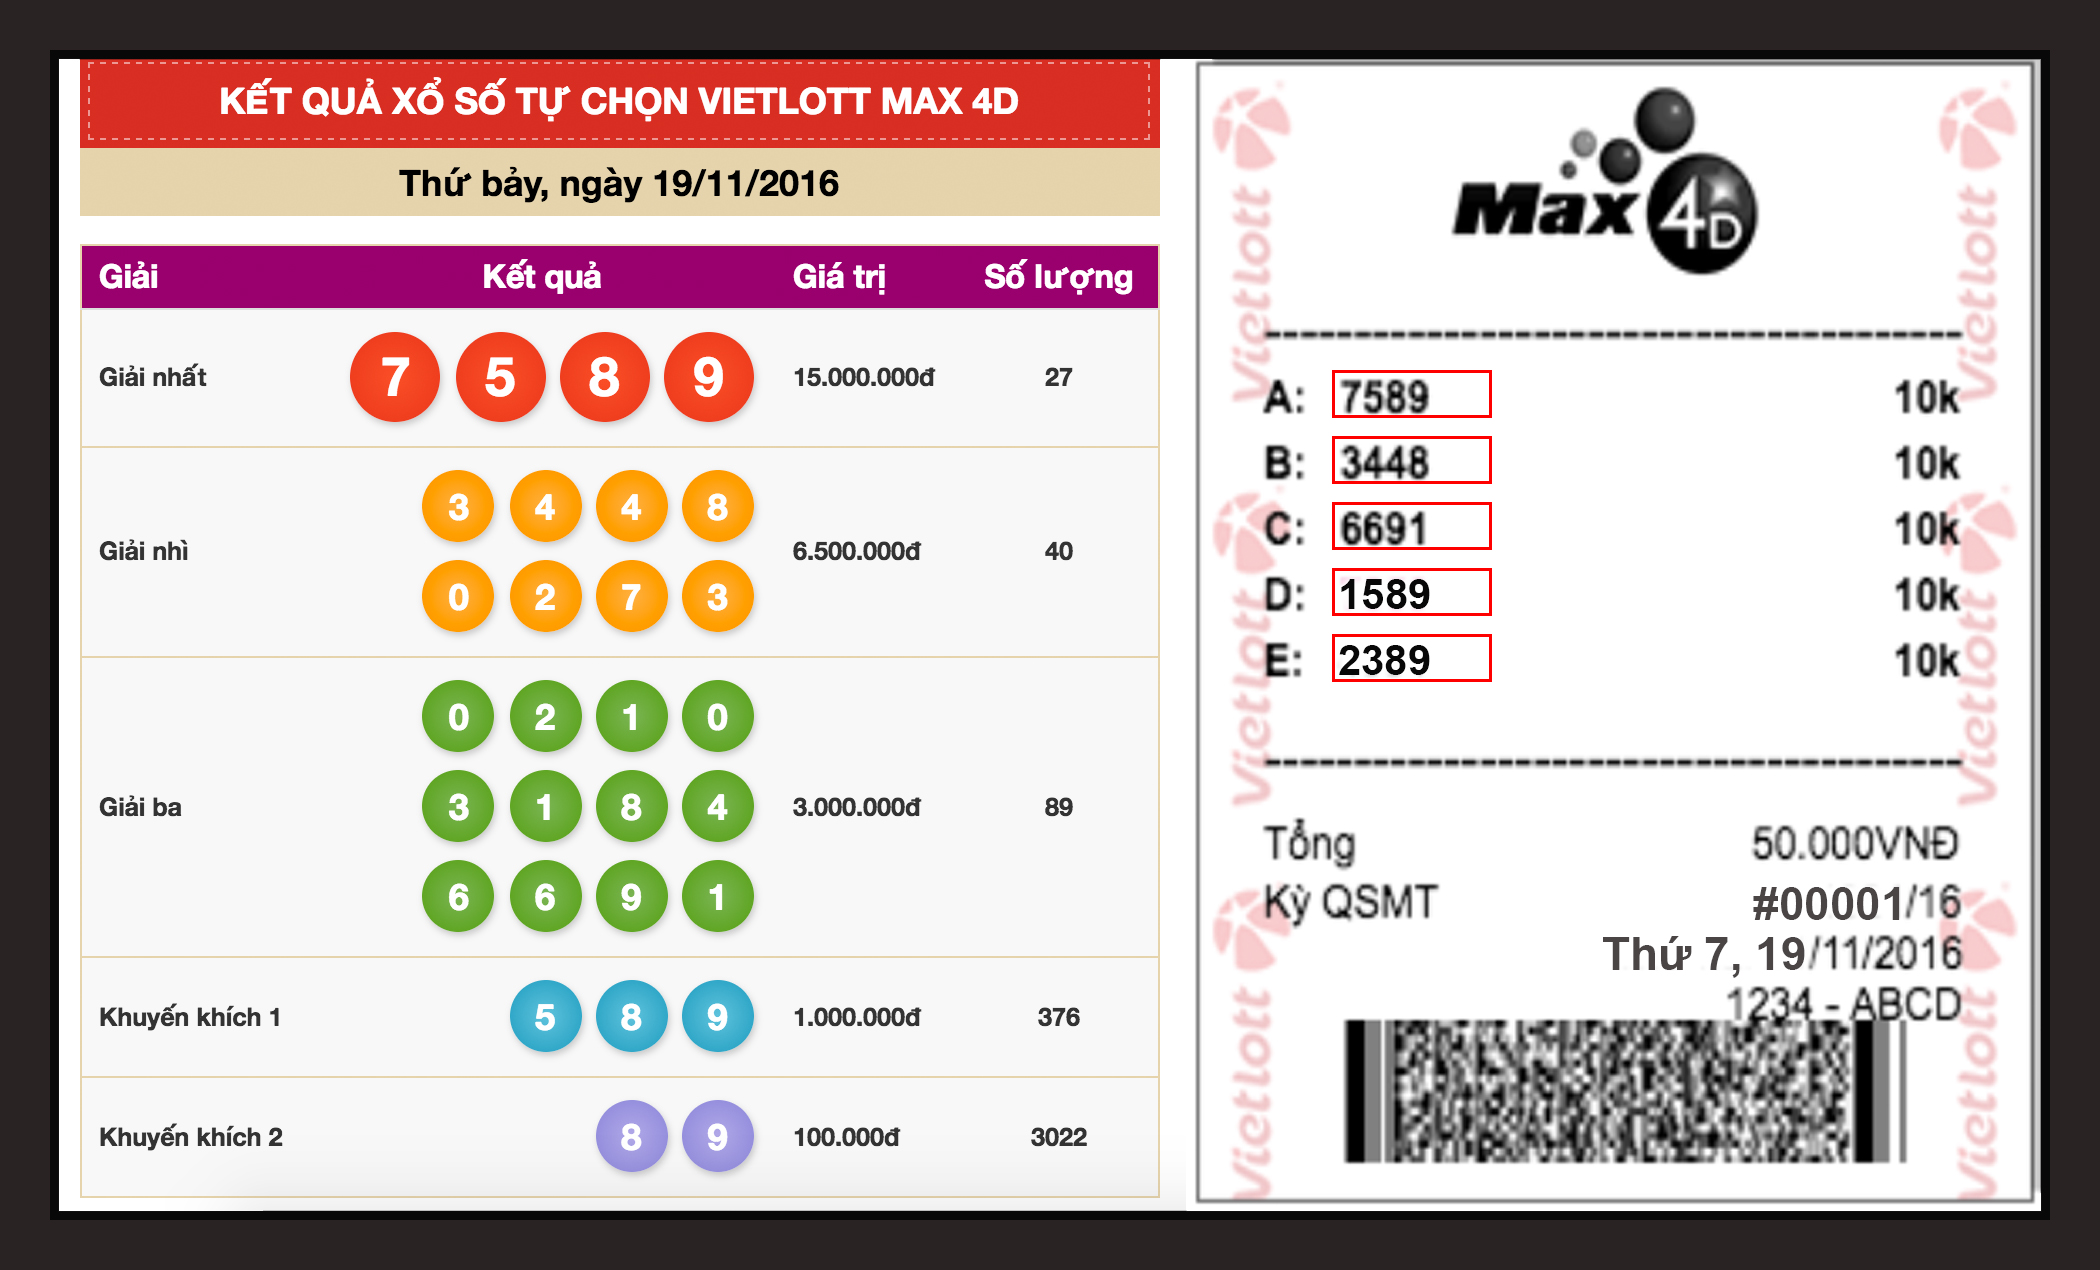 Max 4D is format the select user a number from 0000 to 9999 to tham gia chơi